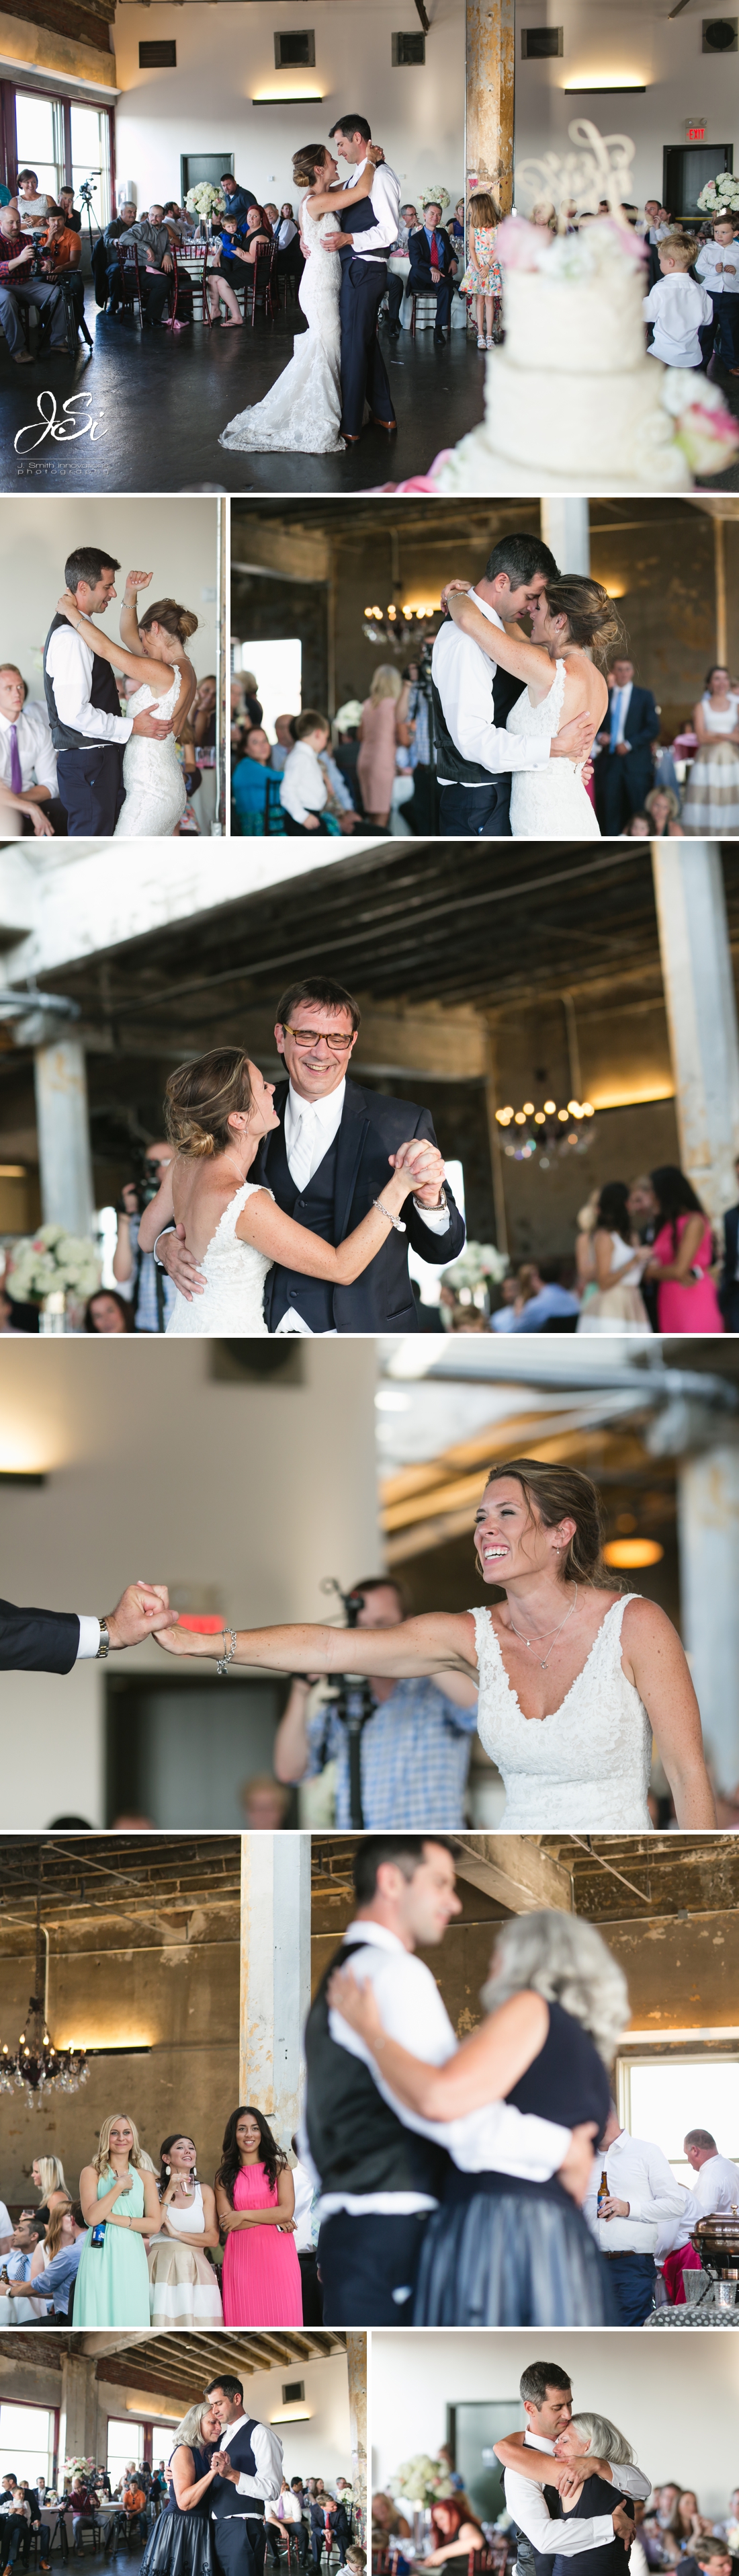 Kansas City The Urban Event vibrant candid first dance wedding picture